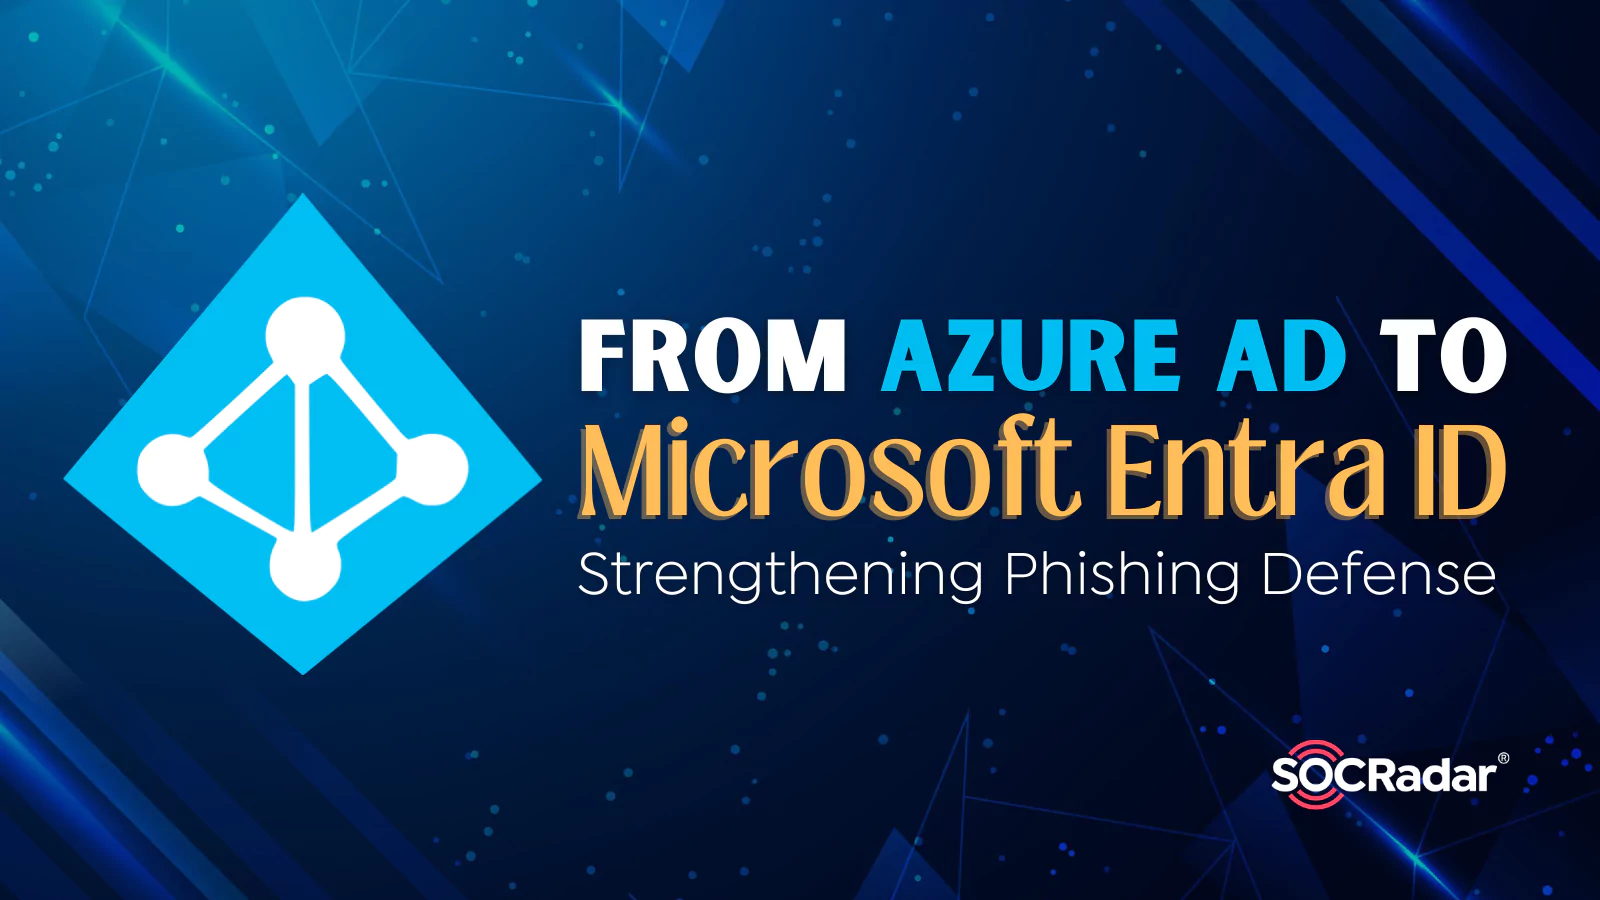 SOCRadar® Cyber Intelligence Inc. | From Azure AD to Microsoft Entra ID: Navigating the Name Change and Strengthening Phishing Defense